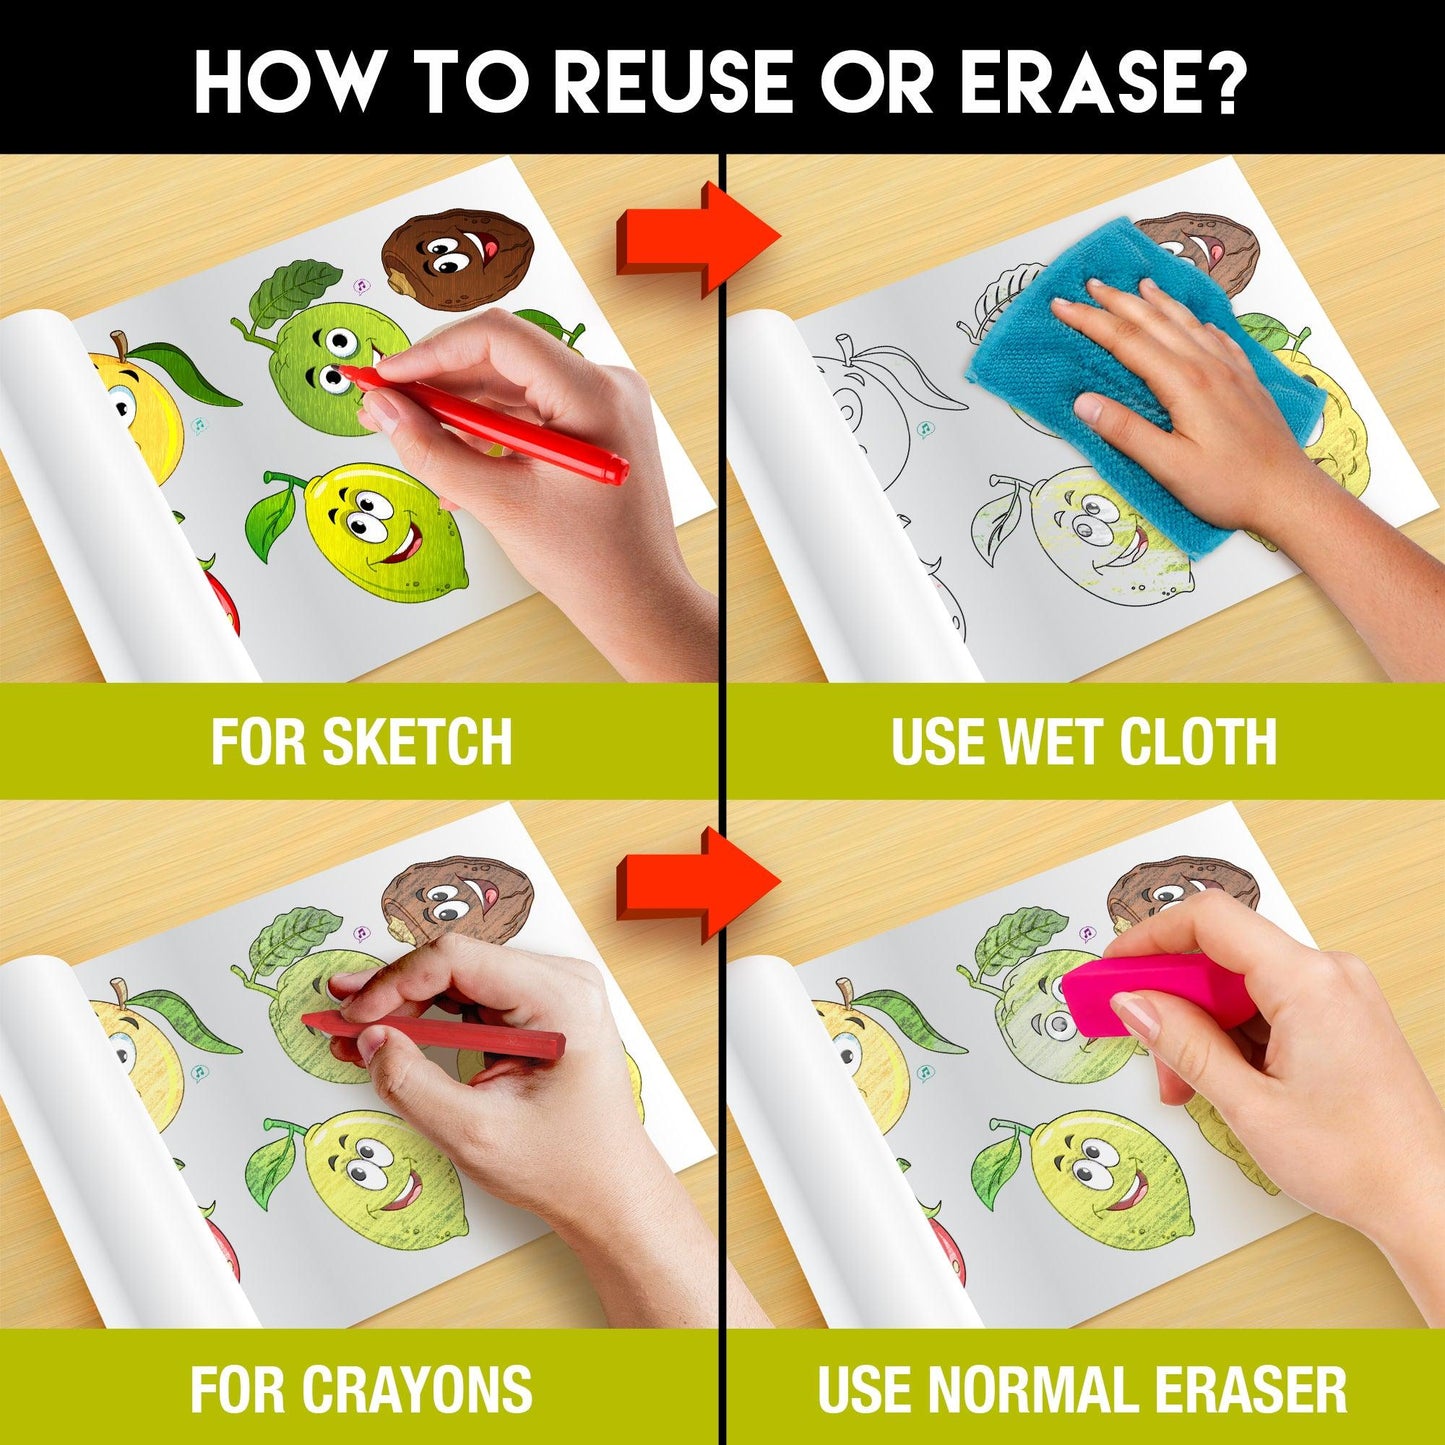 The image has a green background with four pictures demonstrating how to reuse or erase: the first picture depicts sketching on the sheet, the second shows using a wet cloth to remove sketches, the third image displays crayons colouring on the sheet, and the fourth image illustrates erasing crayons with a regular eraser.